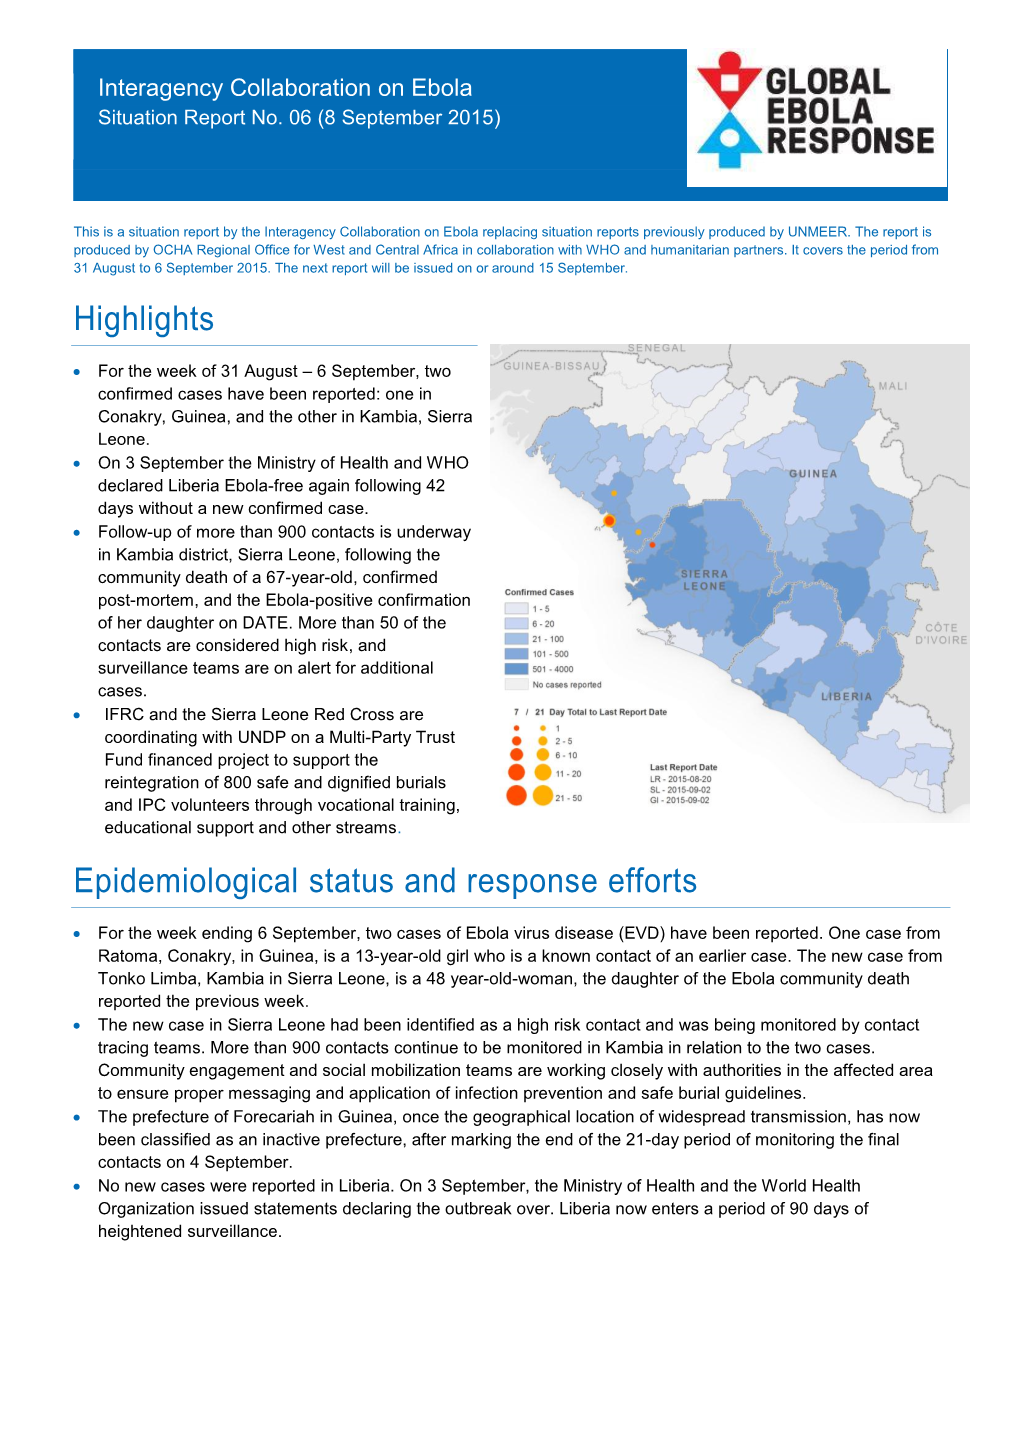 Highlights Epidemiological Status and Response Efforts